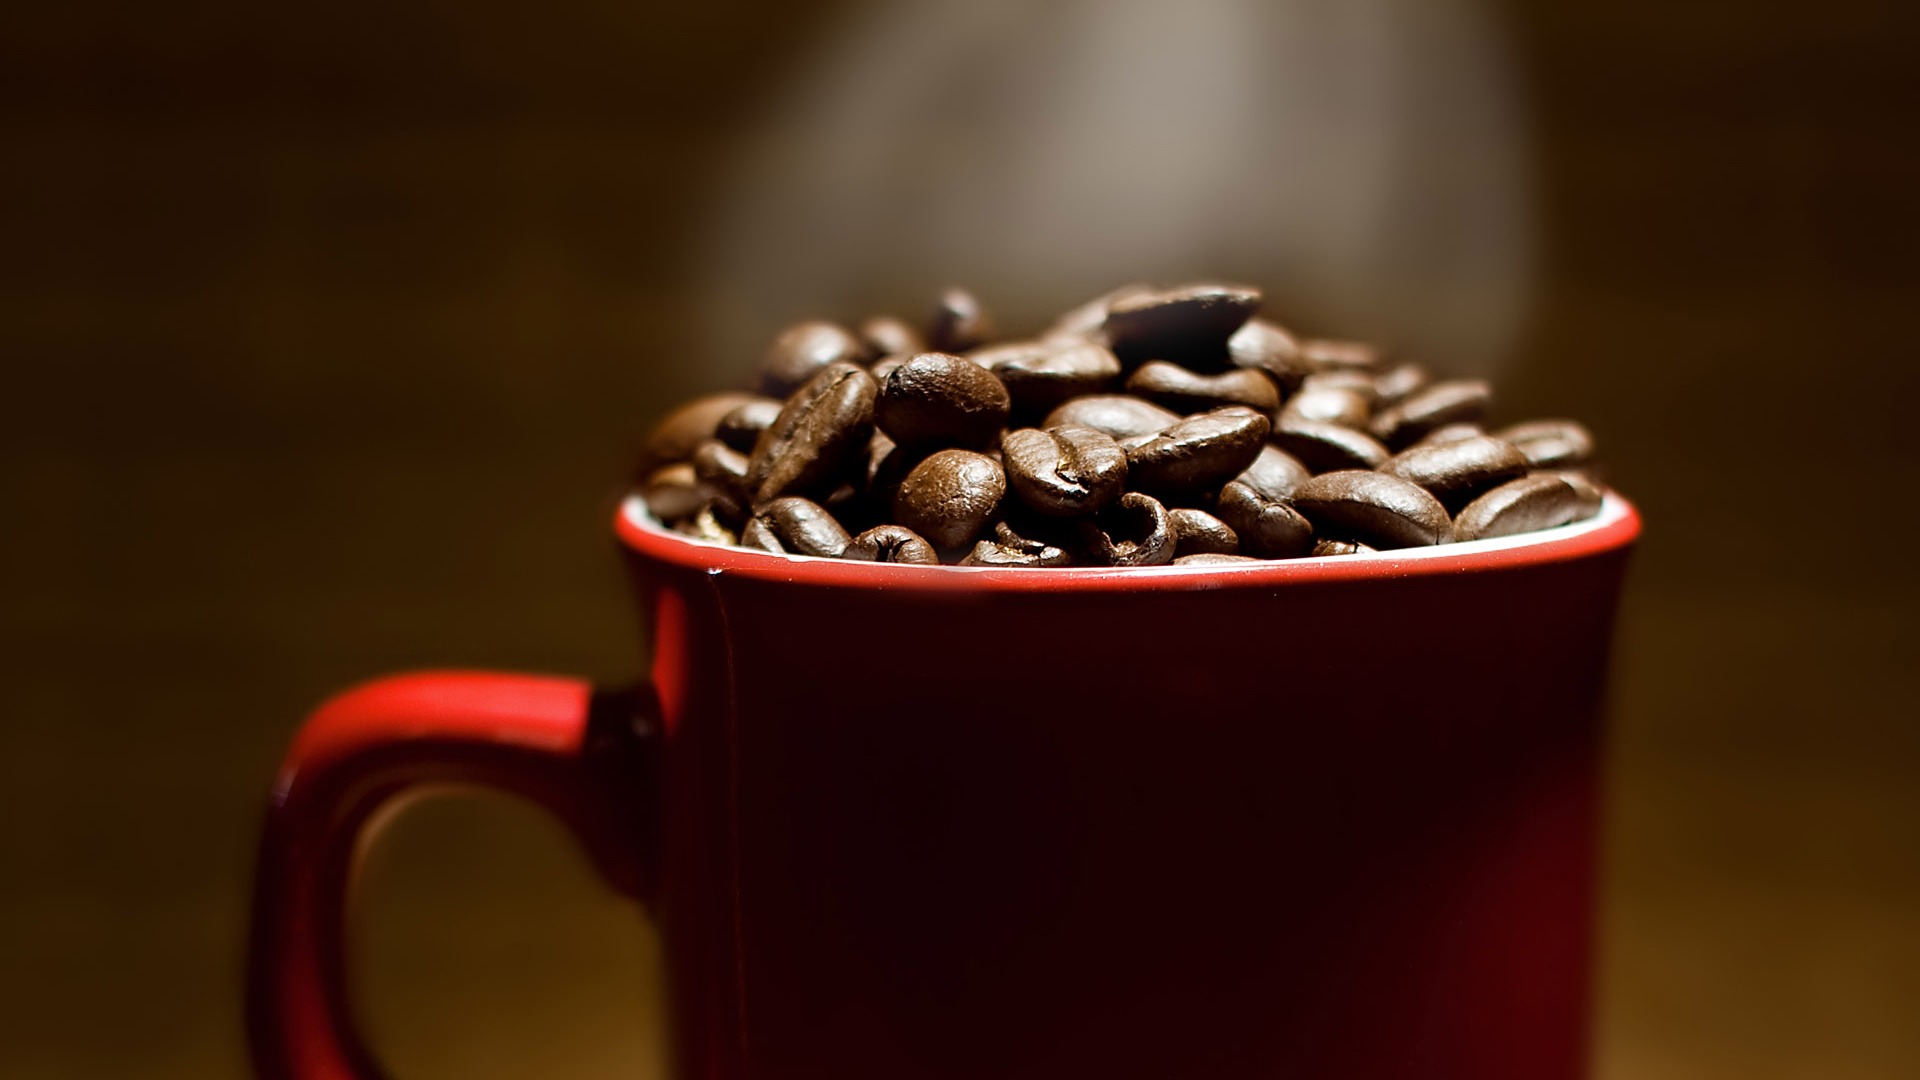 Coffee feature wallpaper (5) #11 - 1920x1080